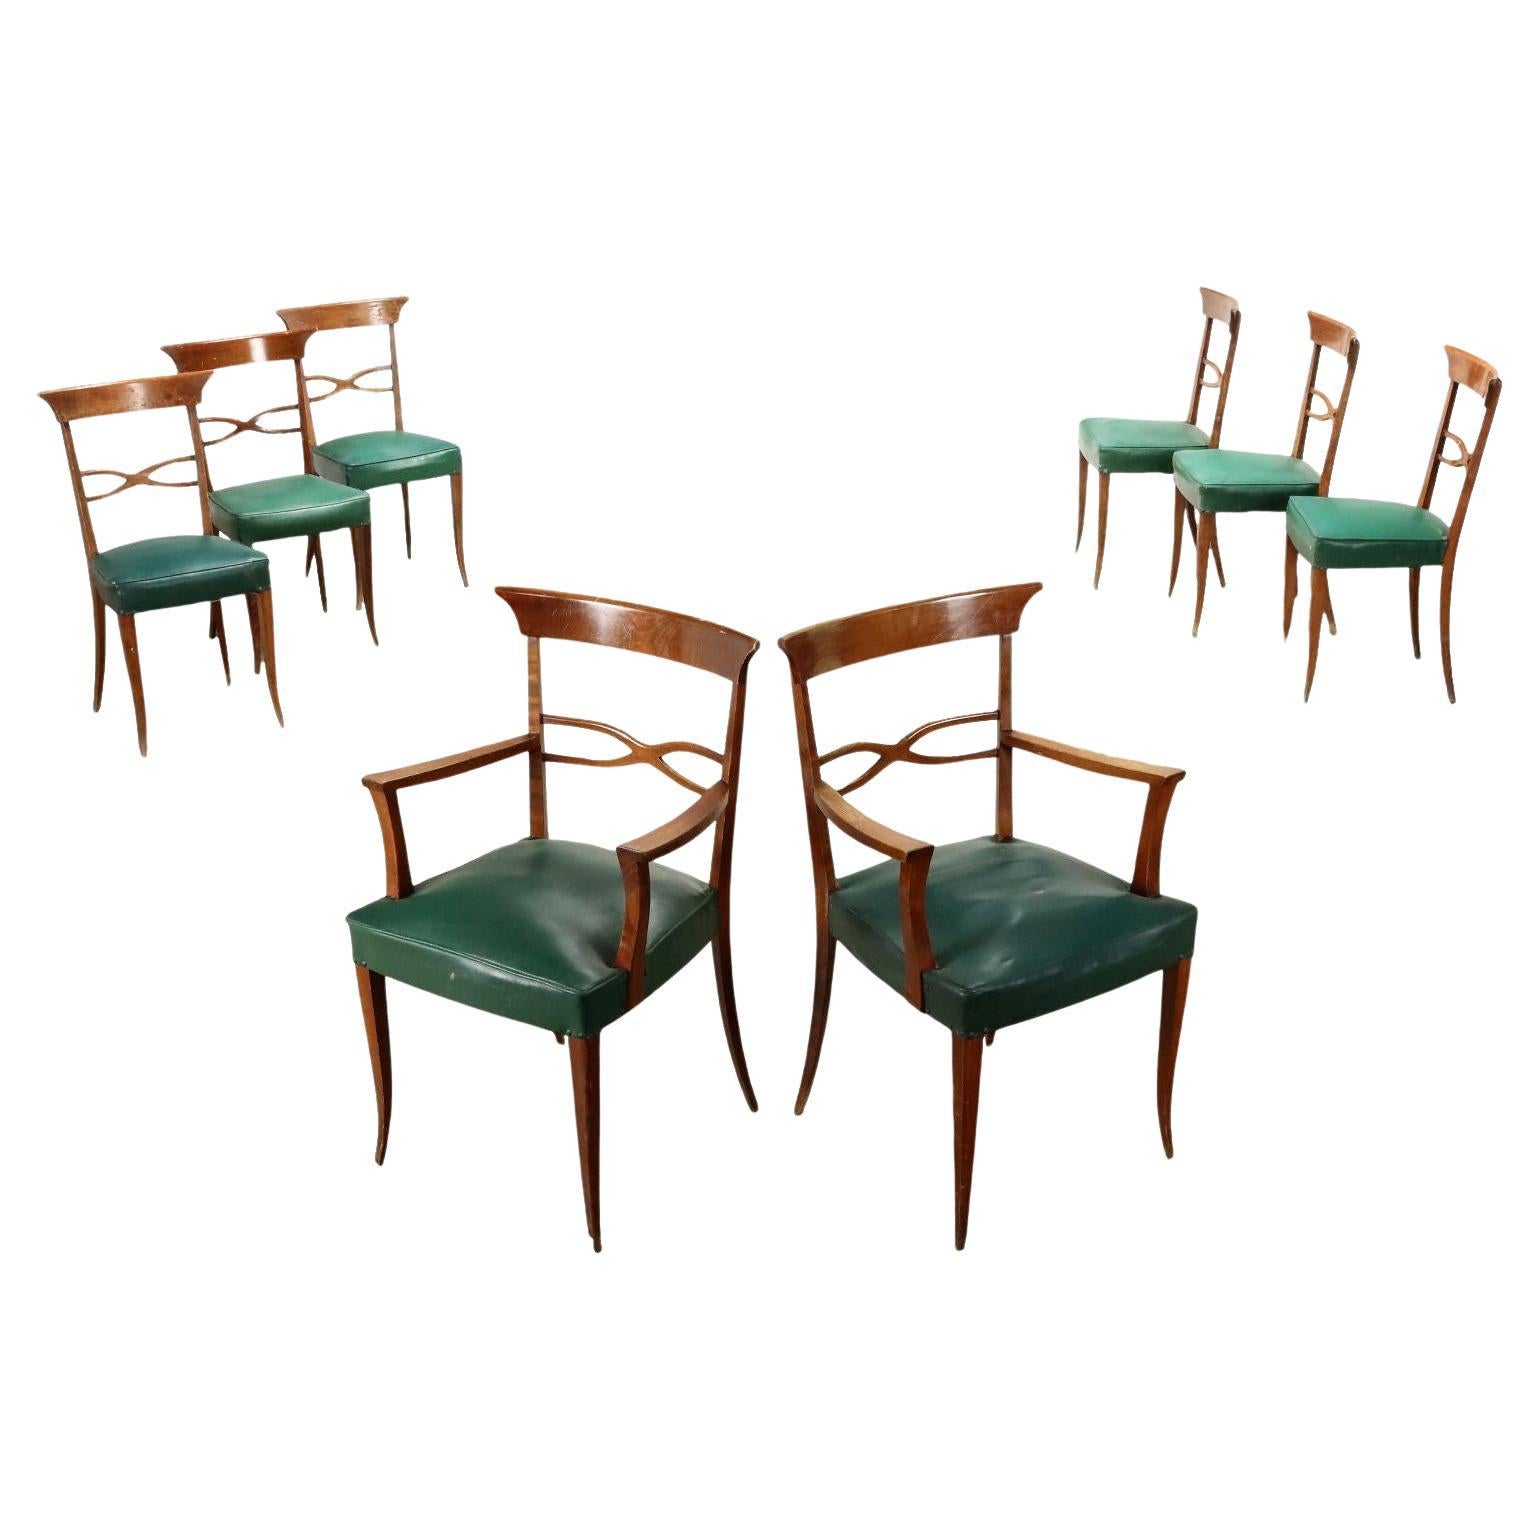 Group of six Chairs and two armchairs 1950s beech and green leatherette For Sale